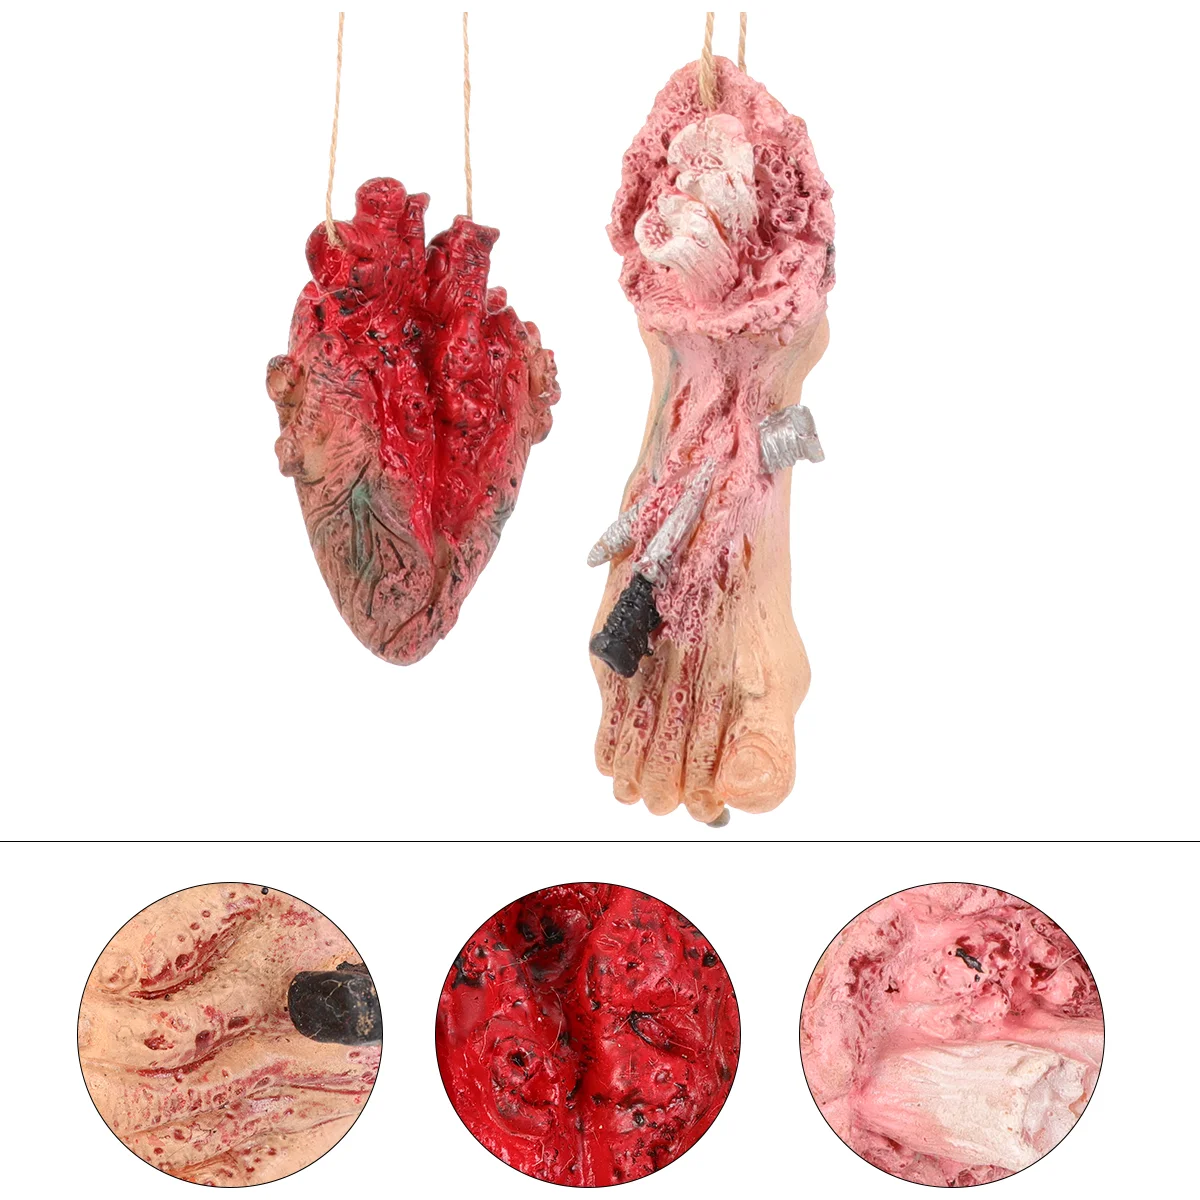 

2 Pcs Simulated Human Organ Pendant Halloween Decorations Outdoor Props Scary Pendants Emulsion Simulation Haunted House